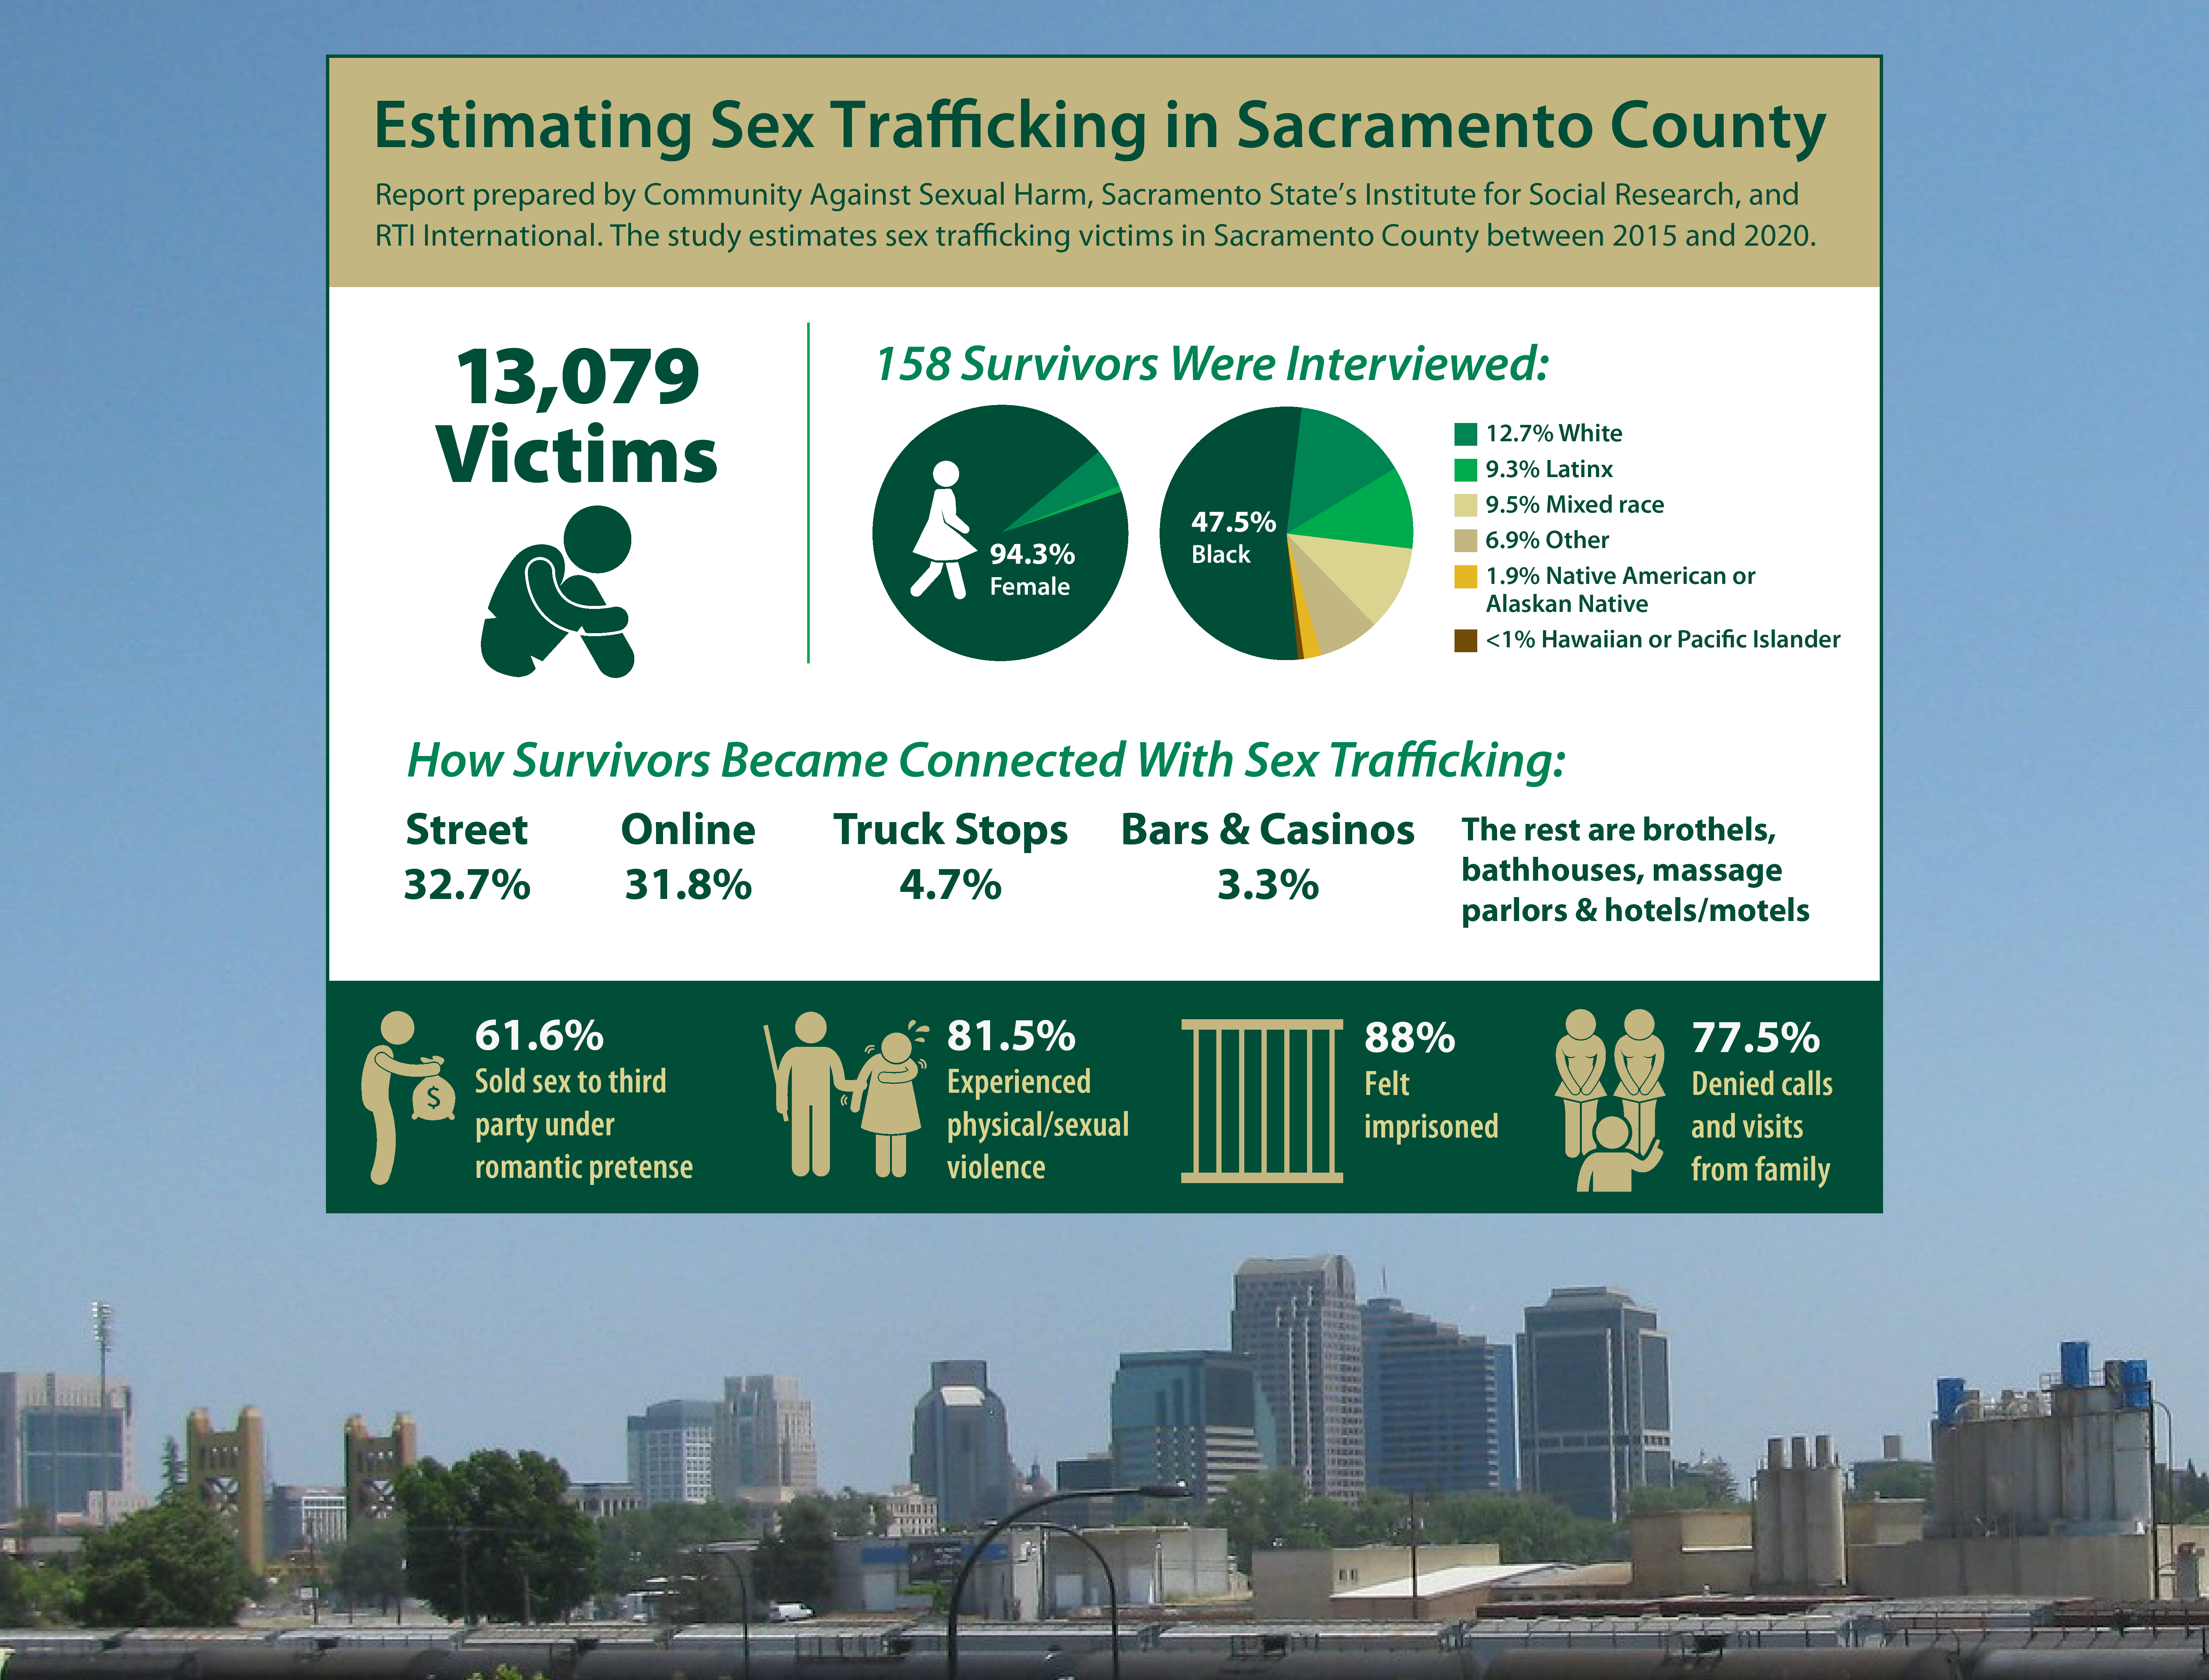 Sac State S Institute For Social Research Helps Document Alarming Level Of Sex Trafficking In